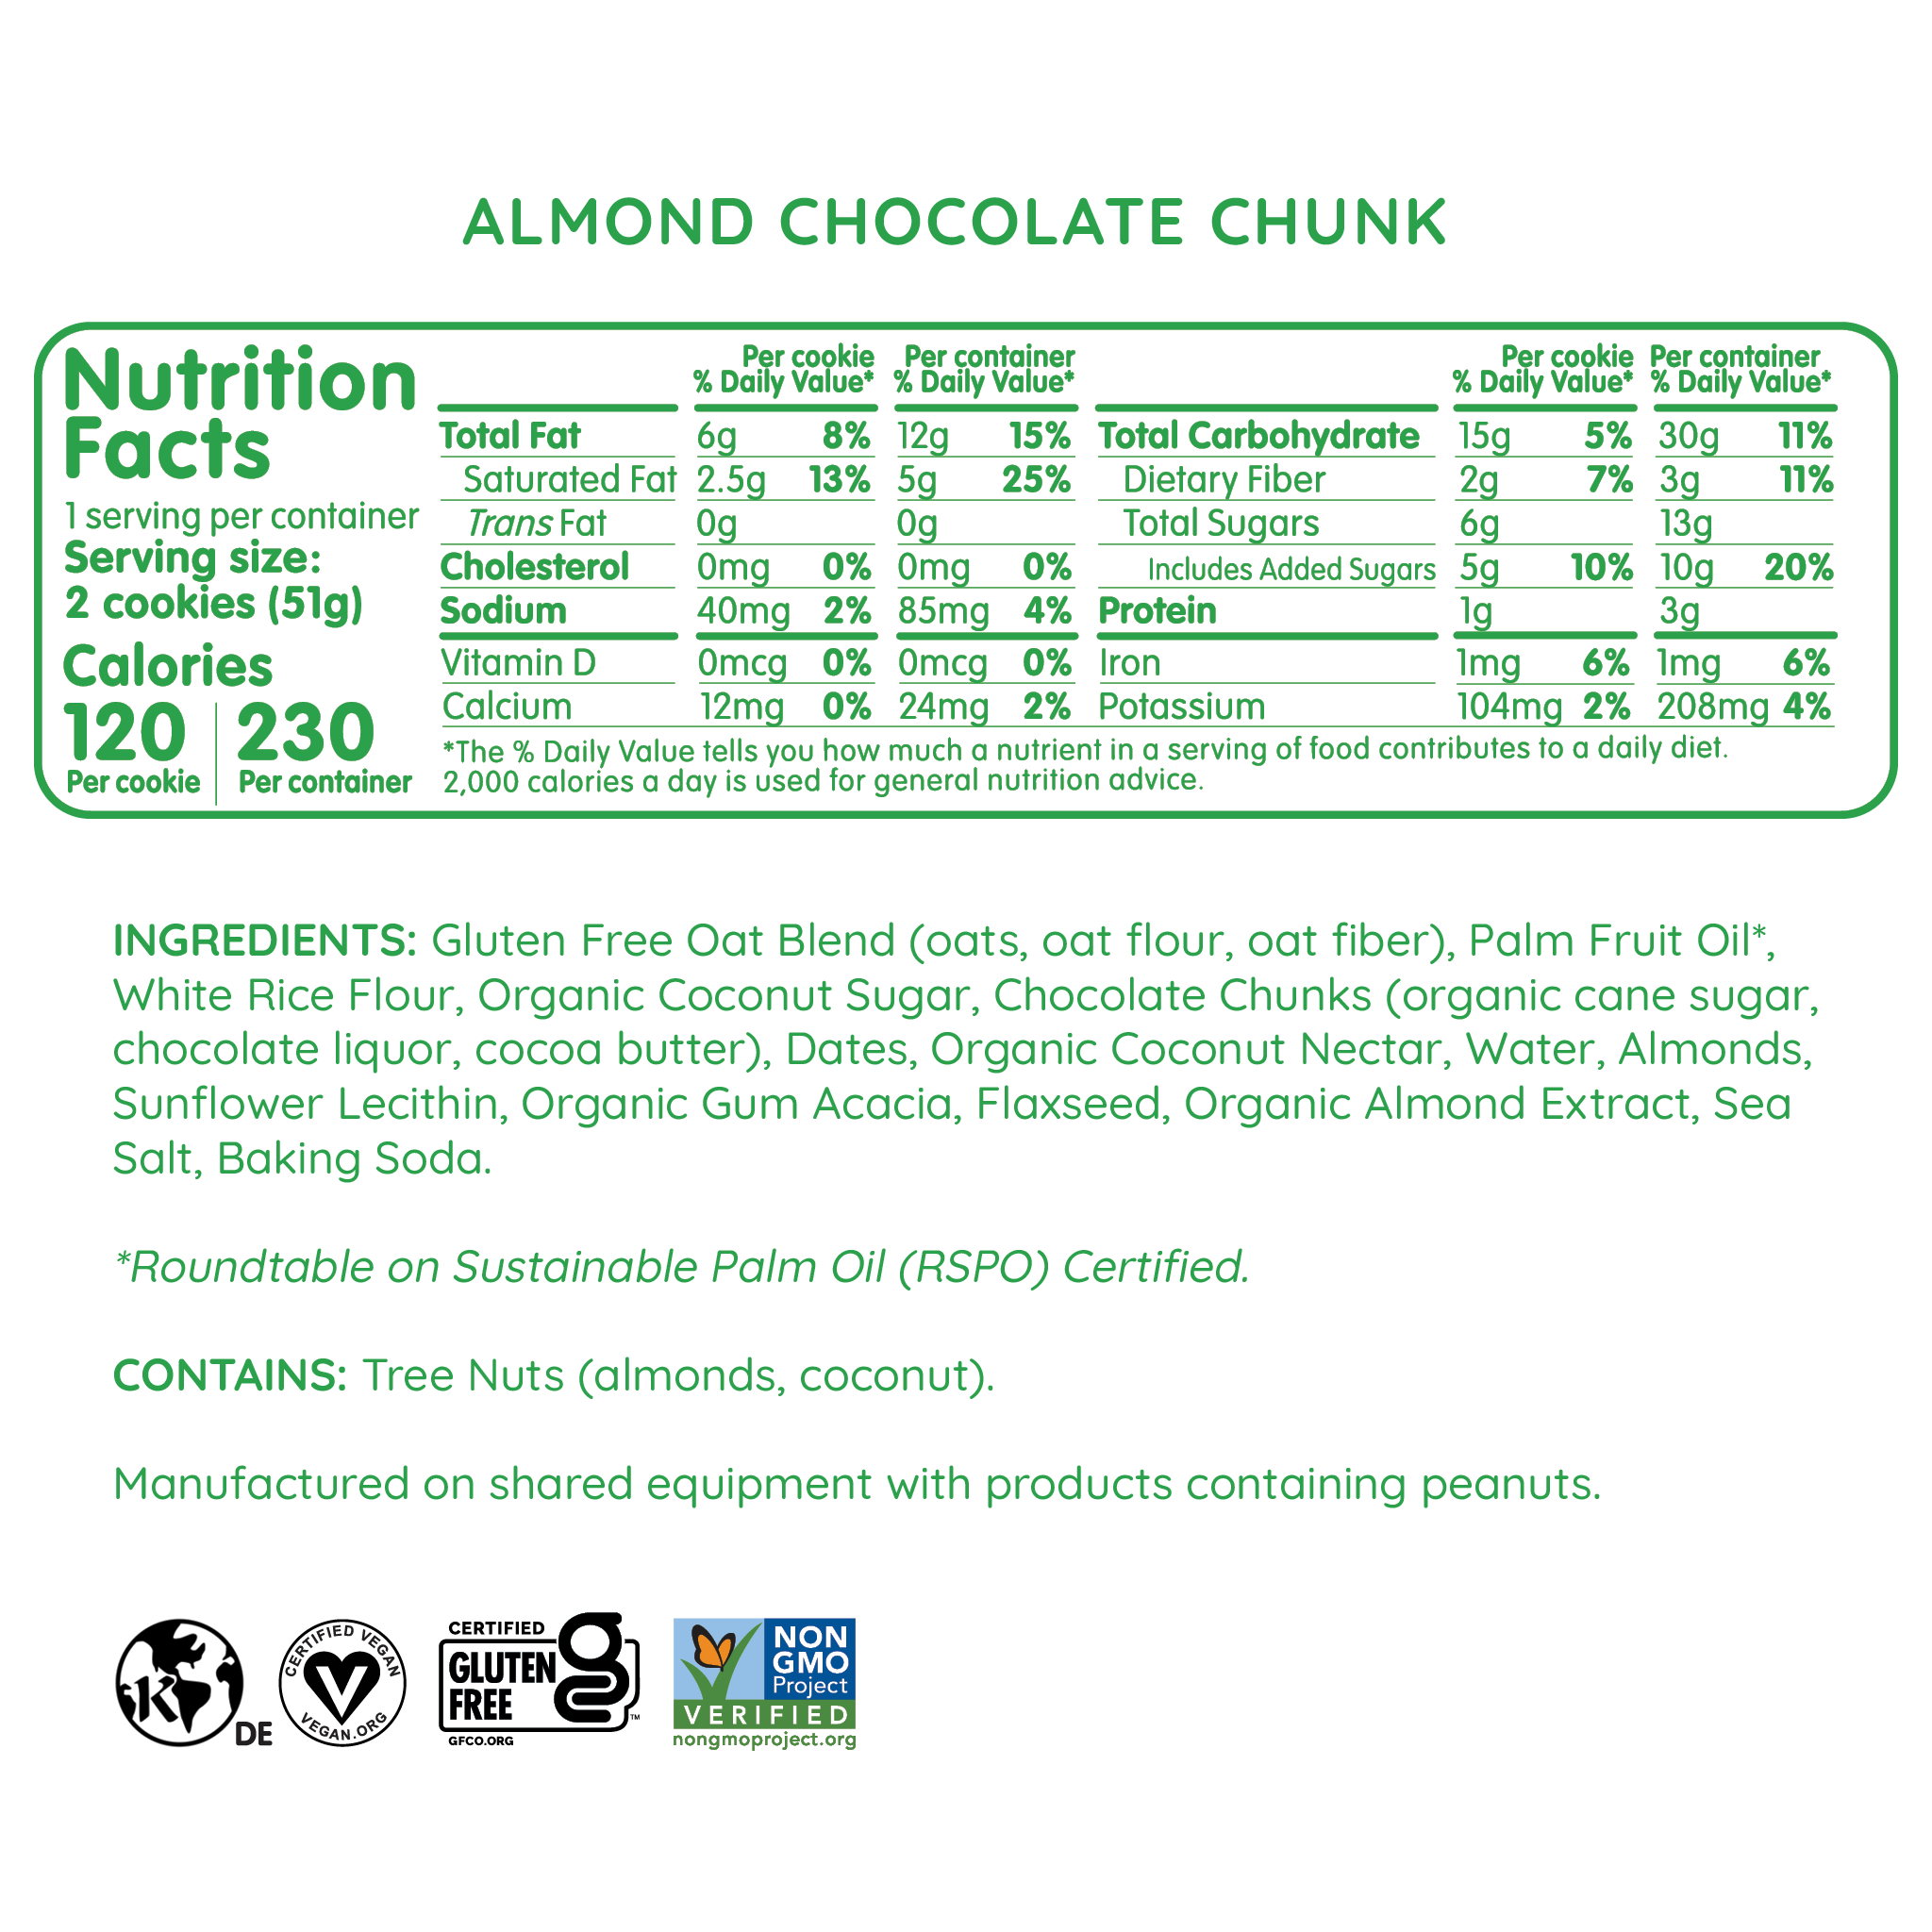 Almond Chocolate Chunk Cookies - Individually Wrapped